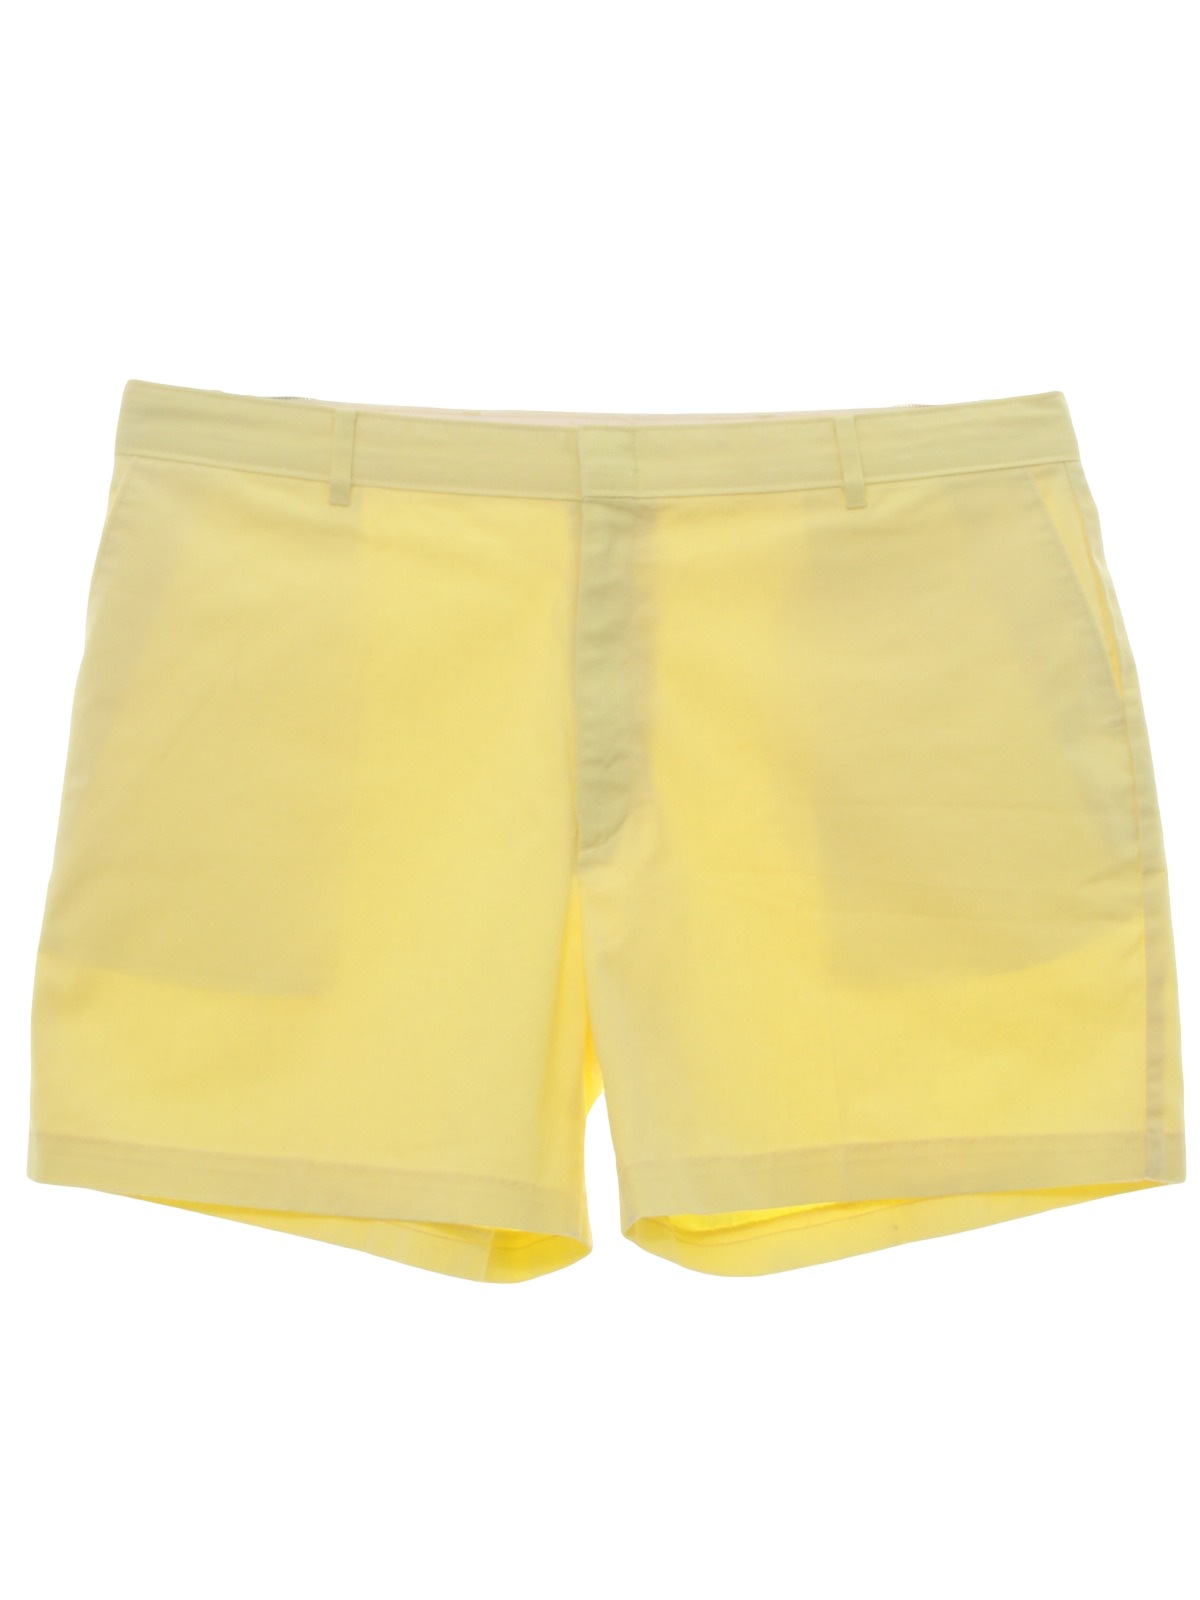 Eighties Honors Shorts: 80s -Honors- Mens yellow background polyester ...